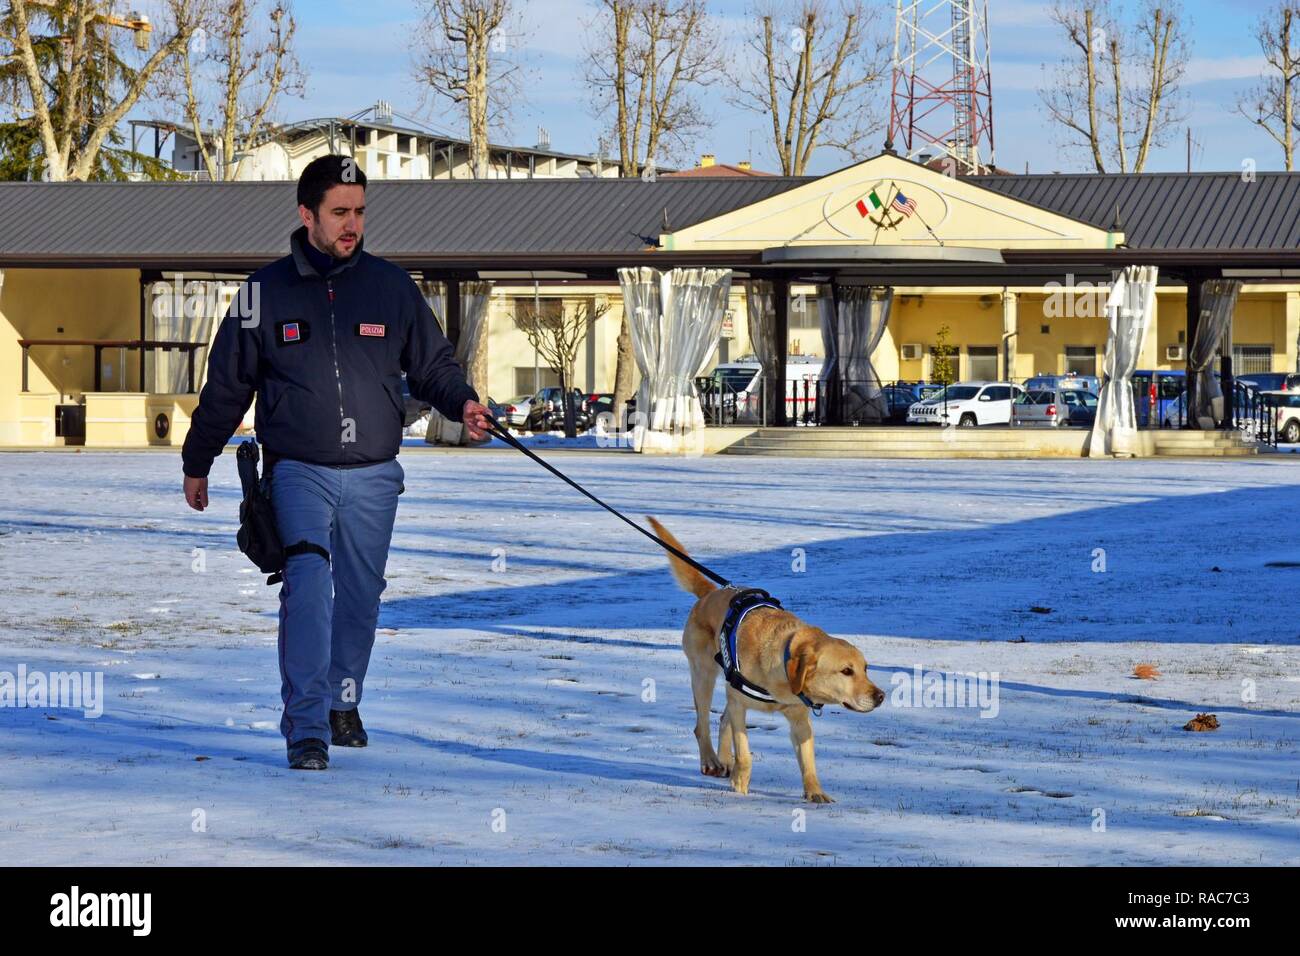 Italian military working dog Thunder and his handler Deputy Inspector Filippo Nicola, assigned to the Italian Police Squadra Cinofili K9 airport Venice, prepare to inspect areas that may have explosive residue at Caserma Ederle, Vicenza, Italy Jan. 17, 2017. Military Working Dog teams are used in patrol, drug and explosive detection and specialized mission functions for the Department of Defense and other government agencies. The 525th Military Working Dog Detachment, joint training with Italian Police Squadra Cinofili K9 airport Venice and Questura di Padova and U.S. Air Force. Stock Photo